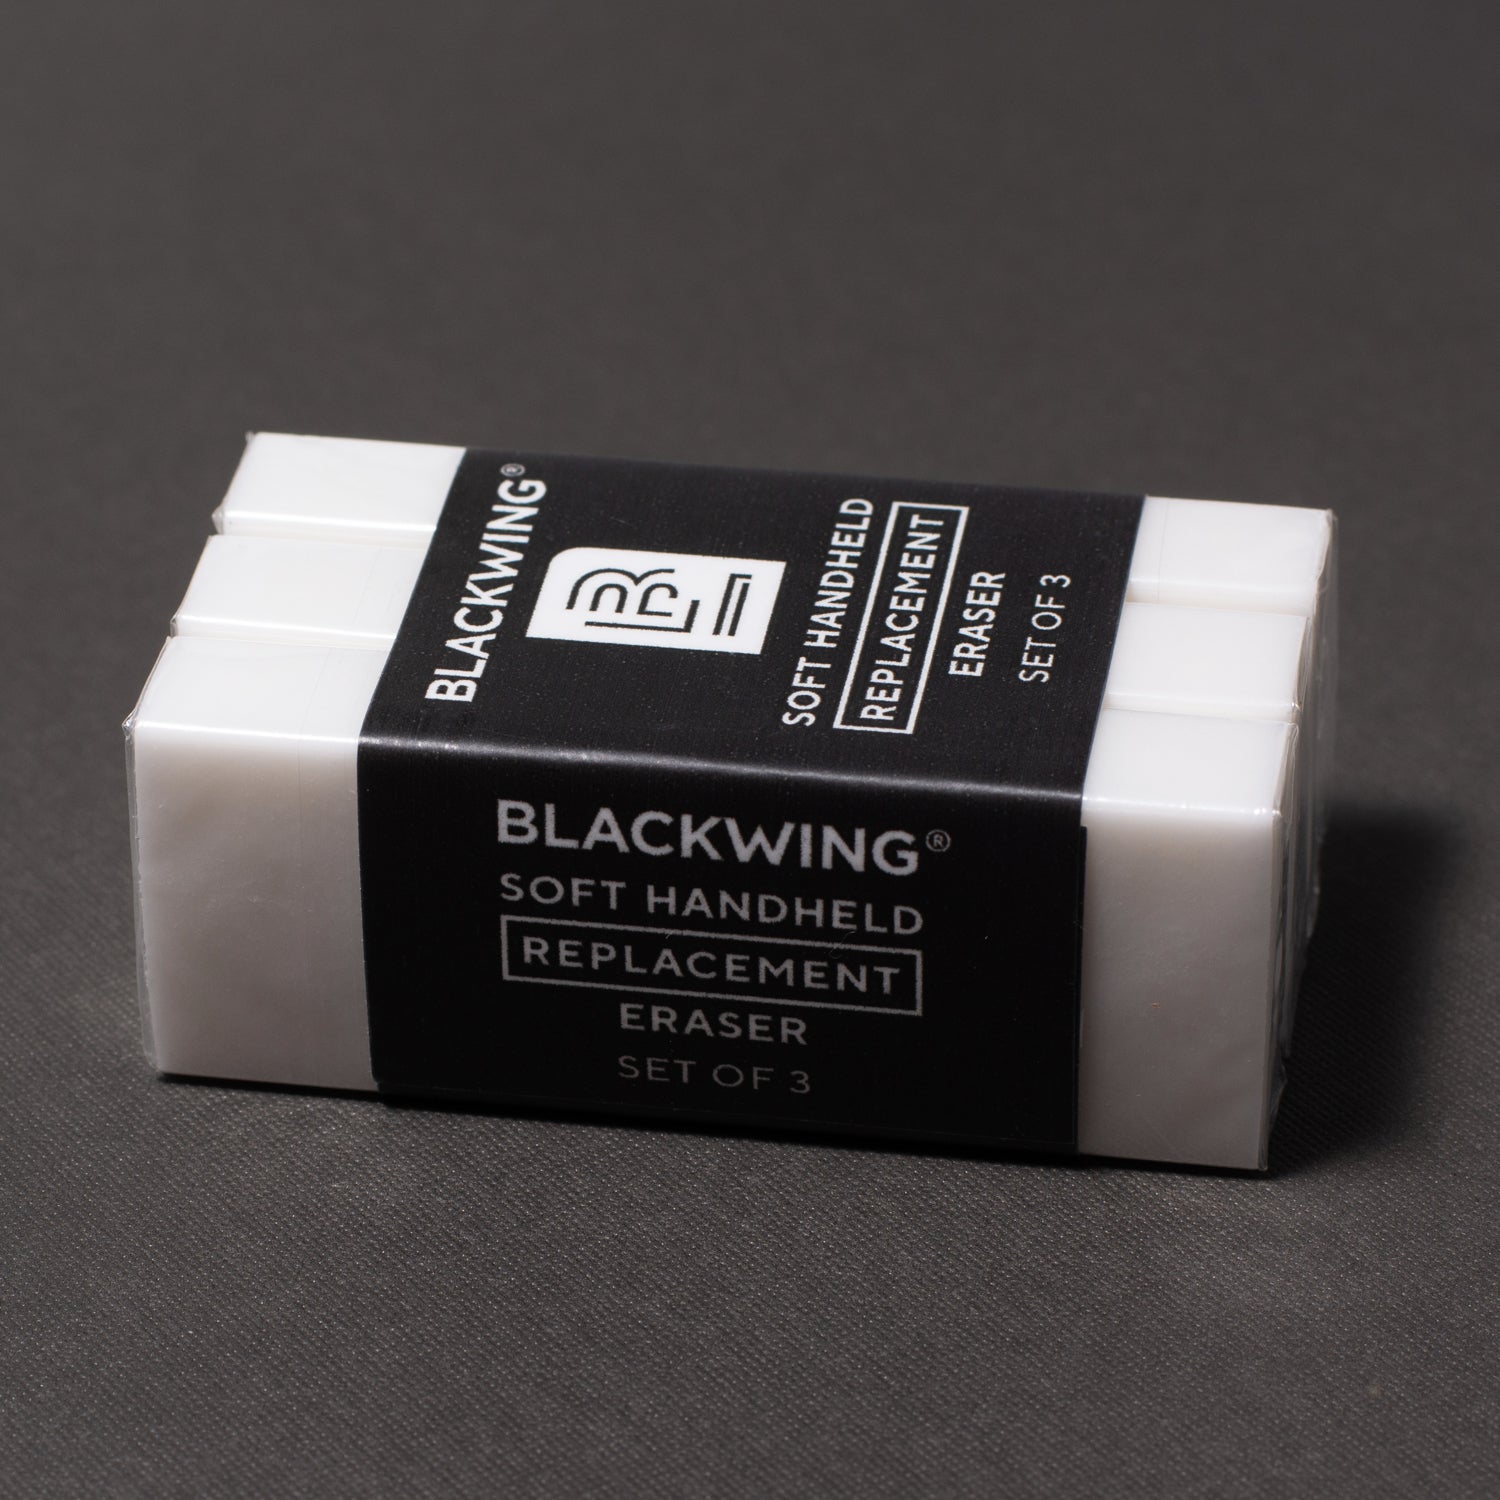 Blackwing Handheld Eraser Replacements - Set of 3 with holder on a grey background.